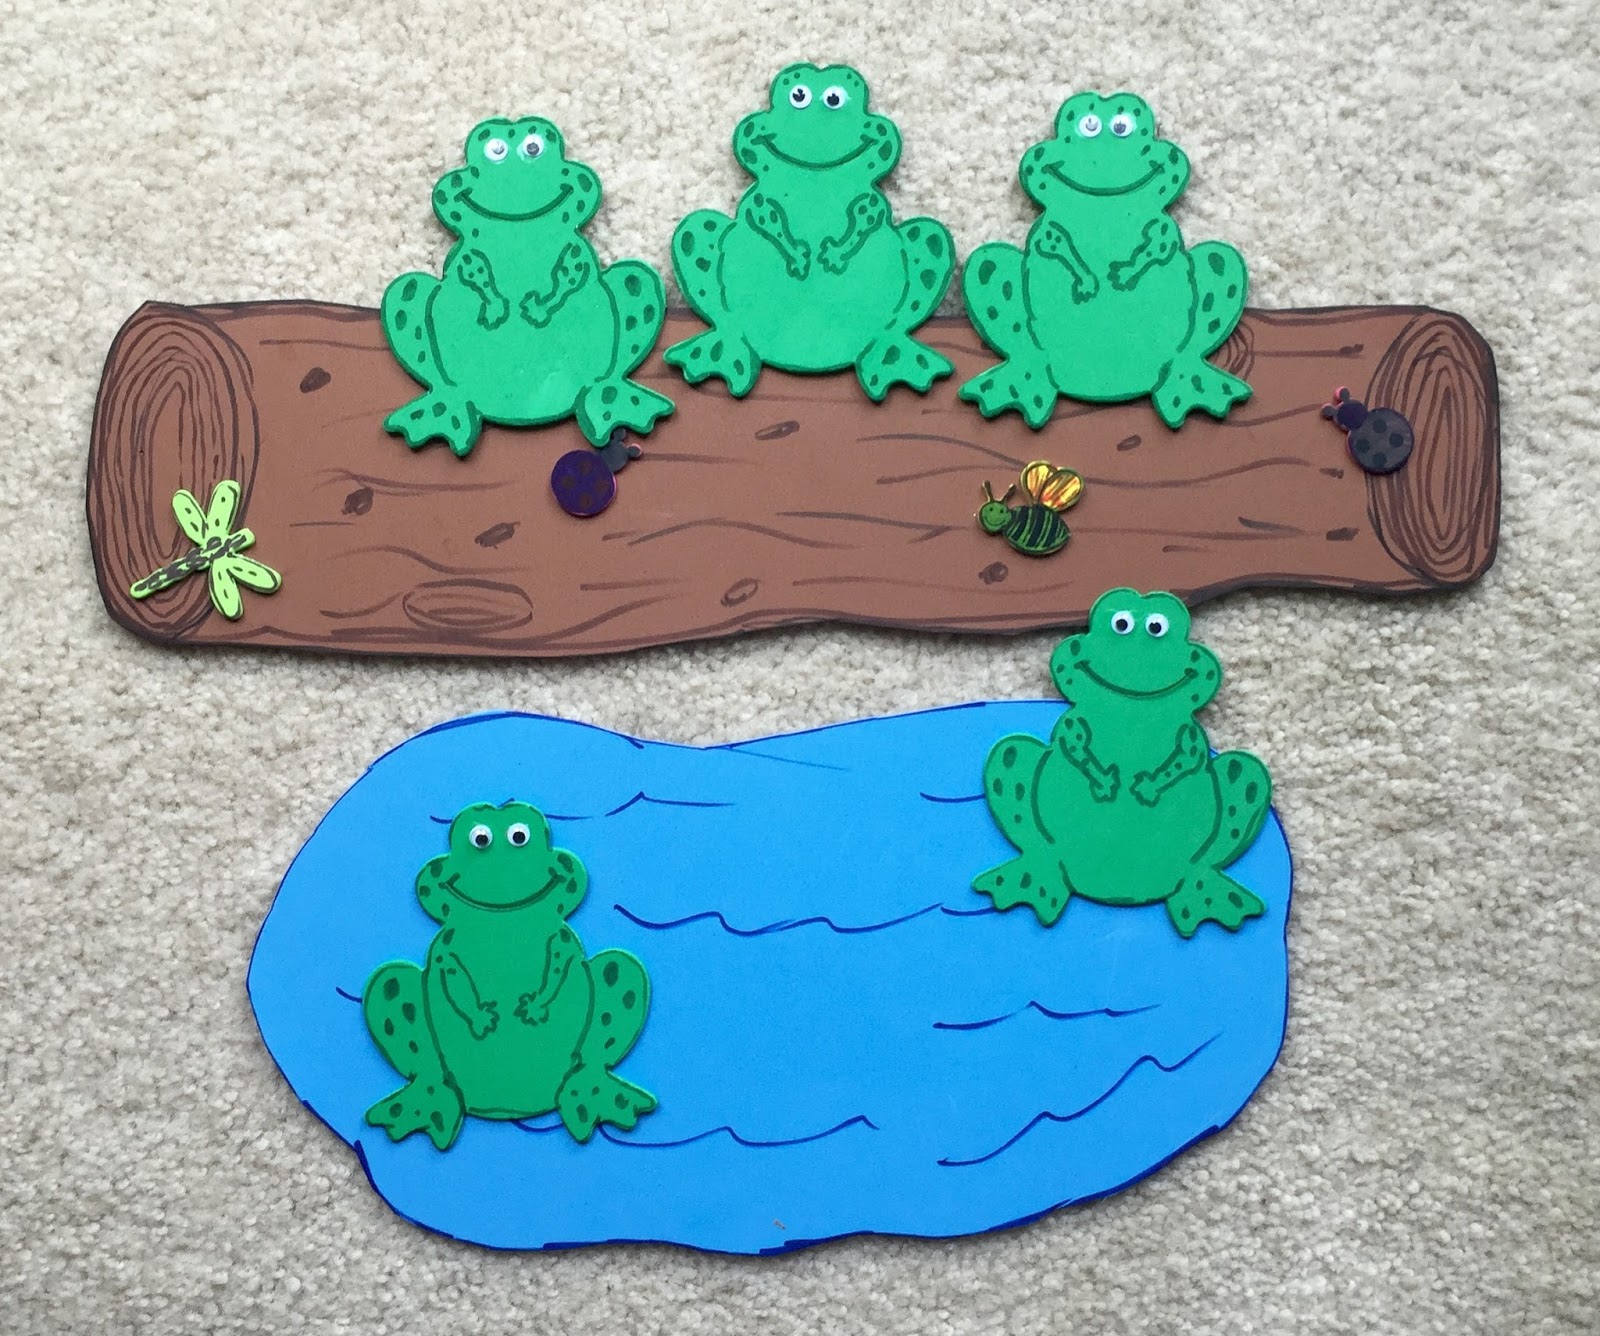 Adventures In Storytime (and Beyond): Five Green & Speckled Frogs, Five